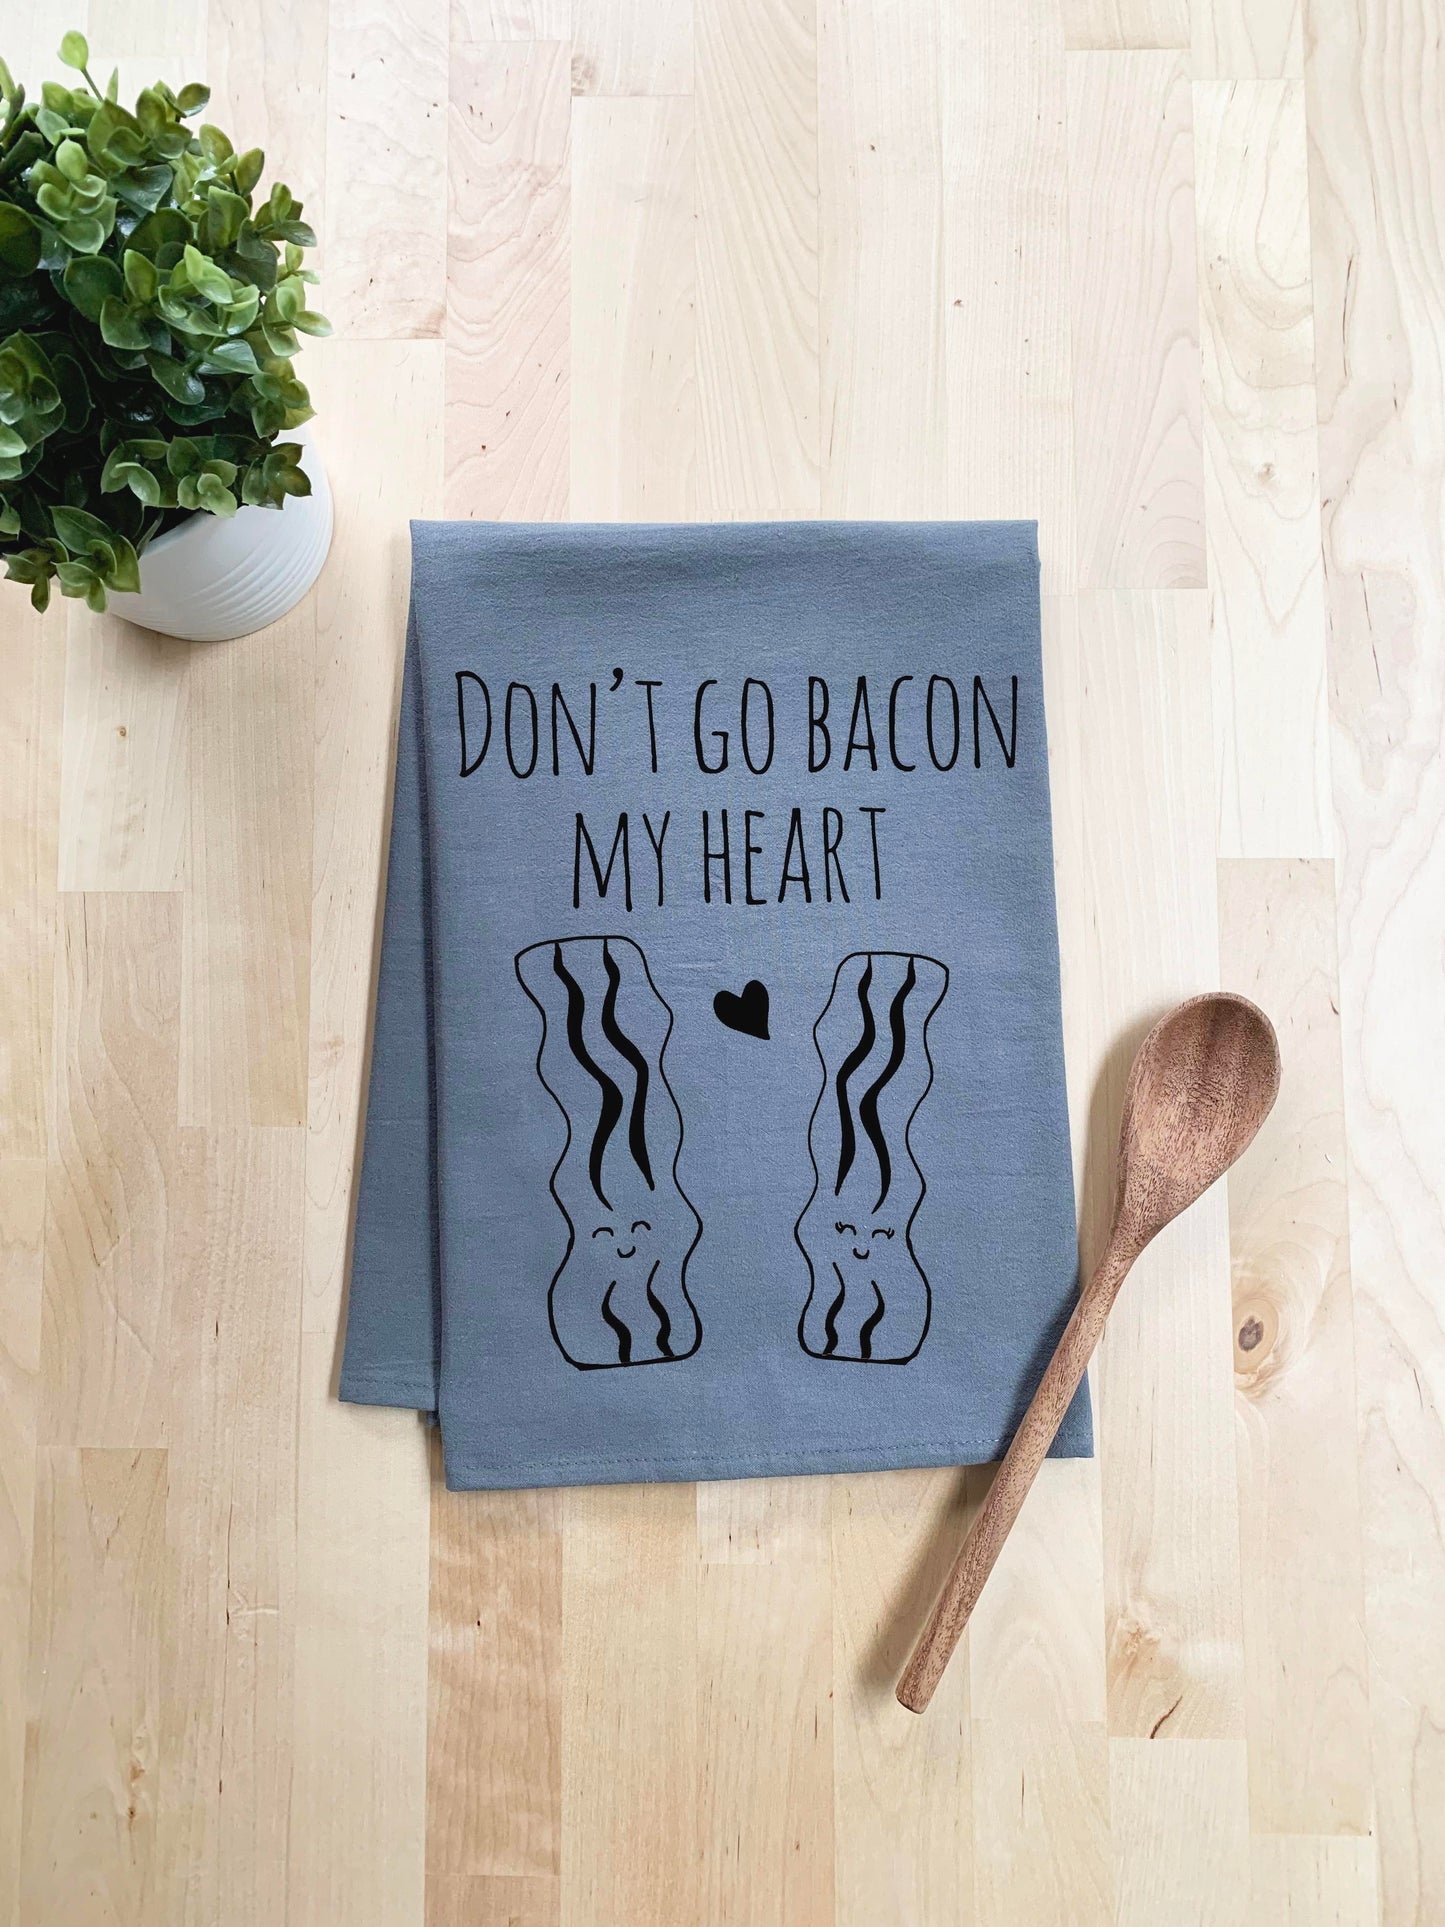 Don't Go Bacon My Heart Dish Towel - White Or Gray - MoonlightMakers